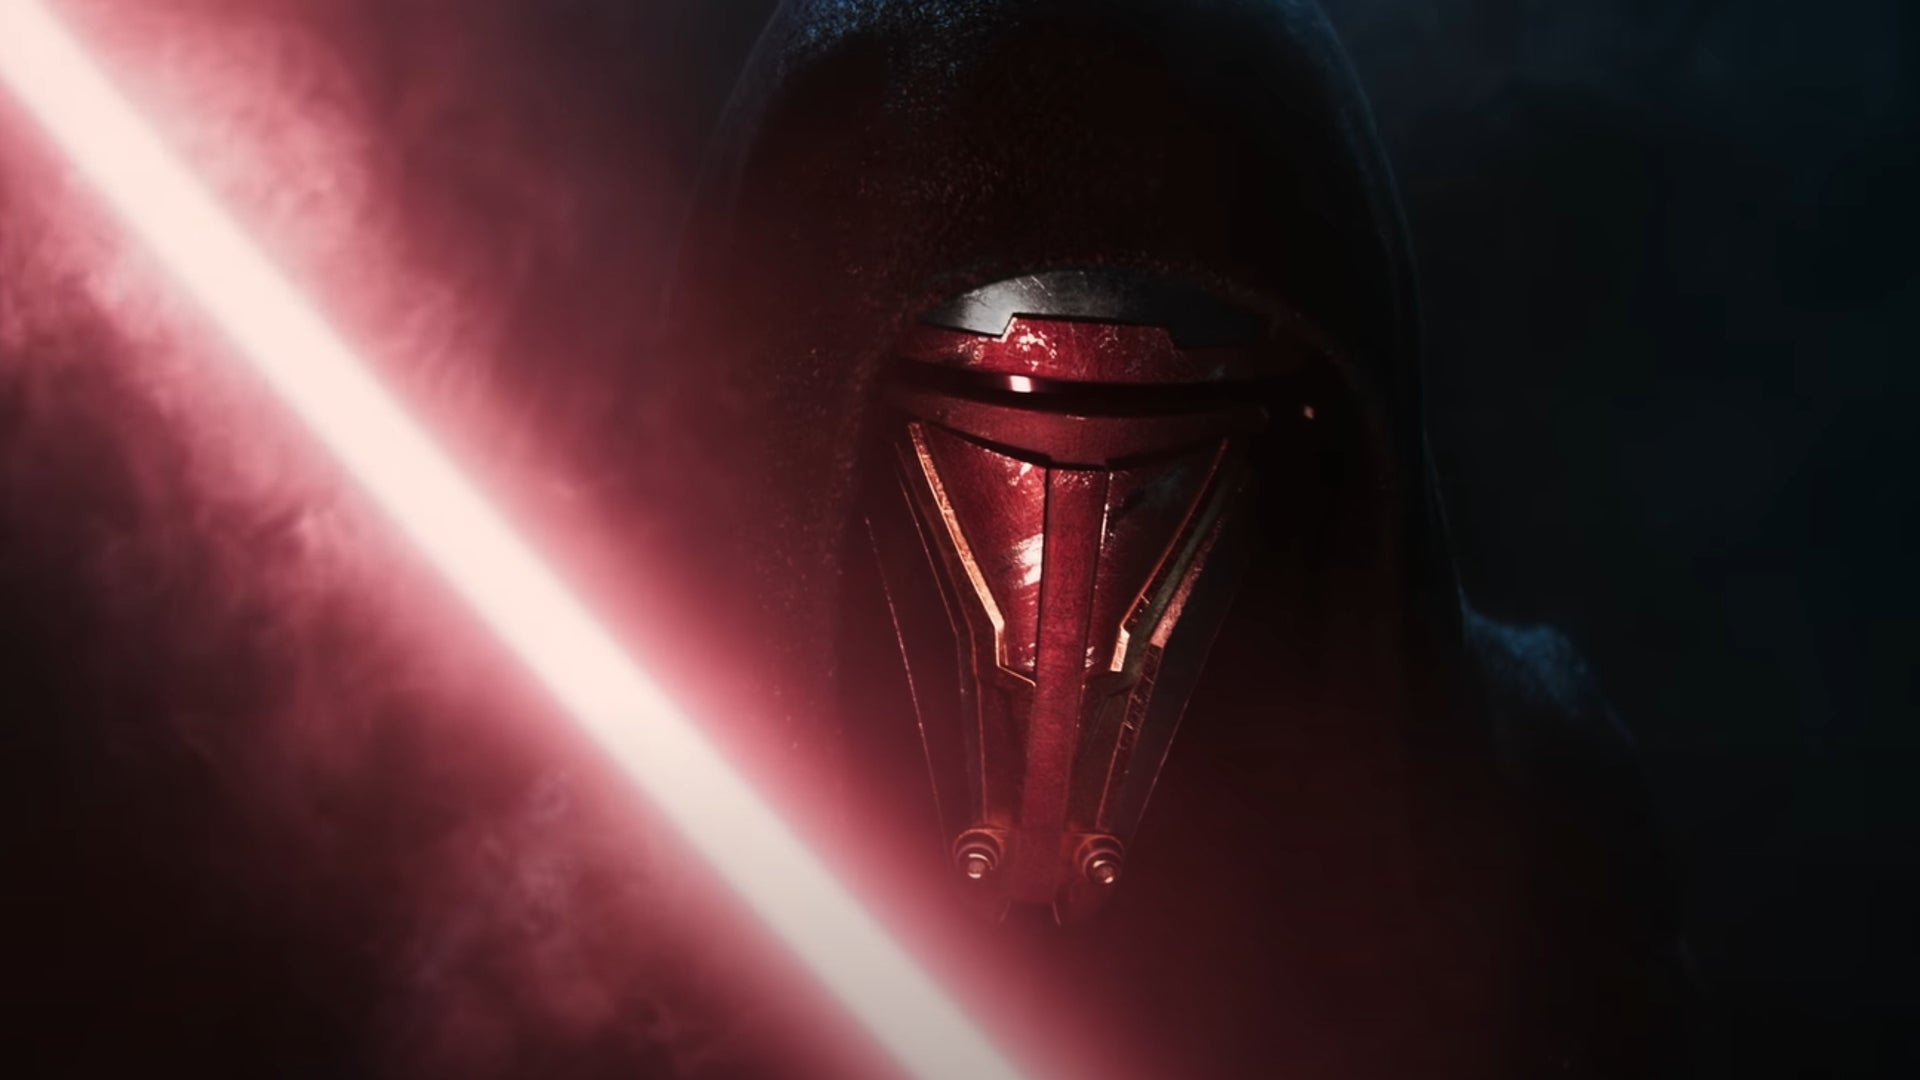 Star Wars: Knights Of The Old Republic remake has been delayed indefinitely.